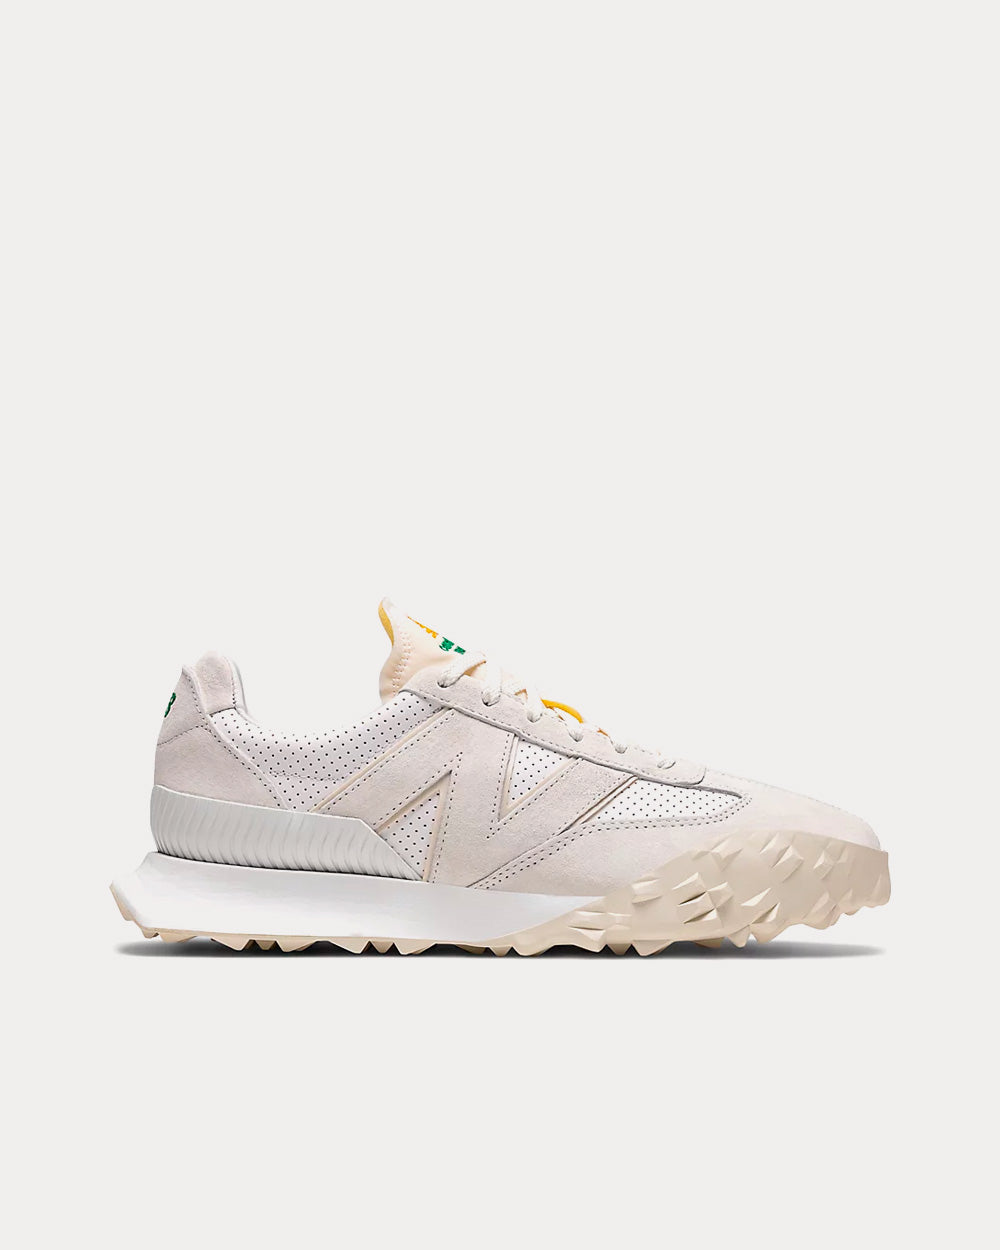 New Balance X Casablanca - XC-72 Marshmallow with Brilliant White Low Top Sneakers